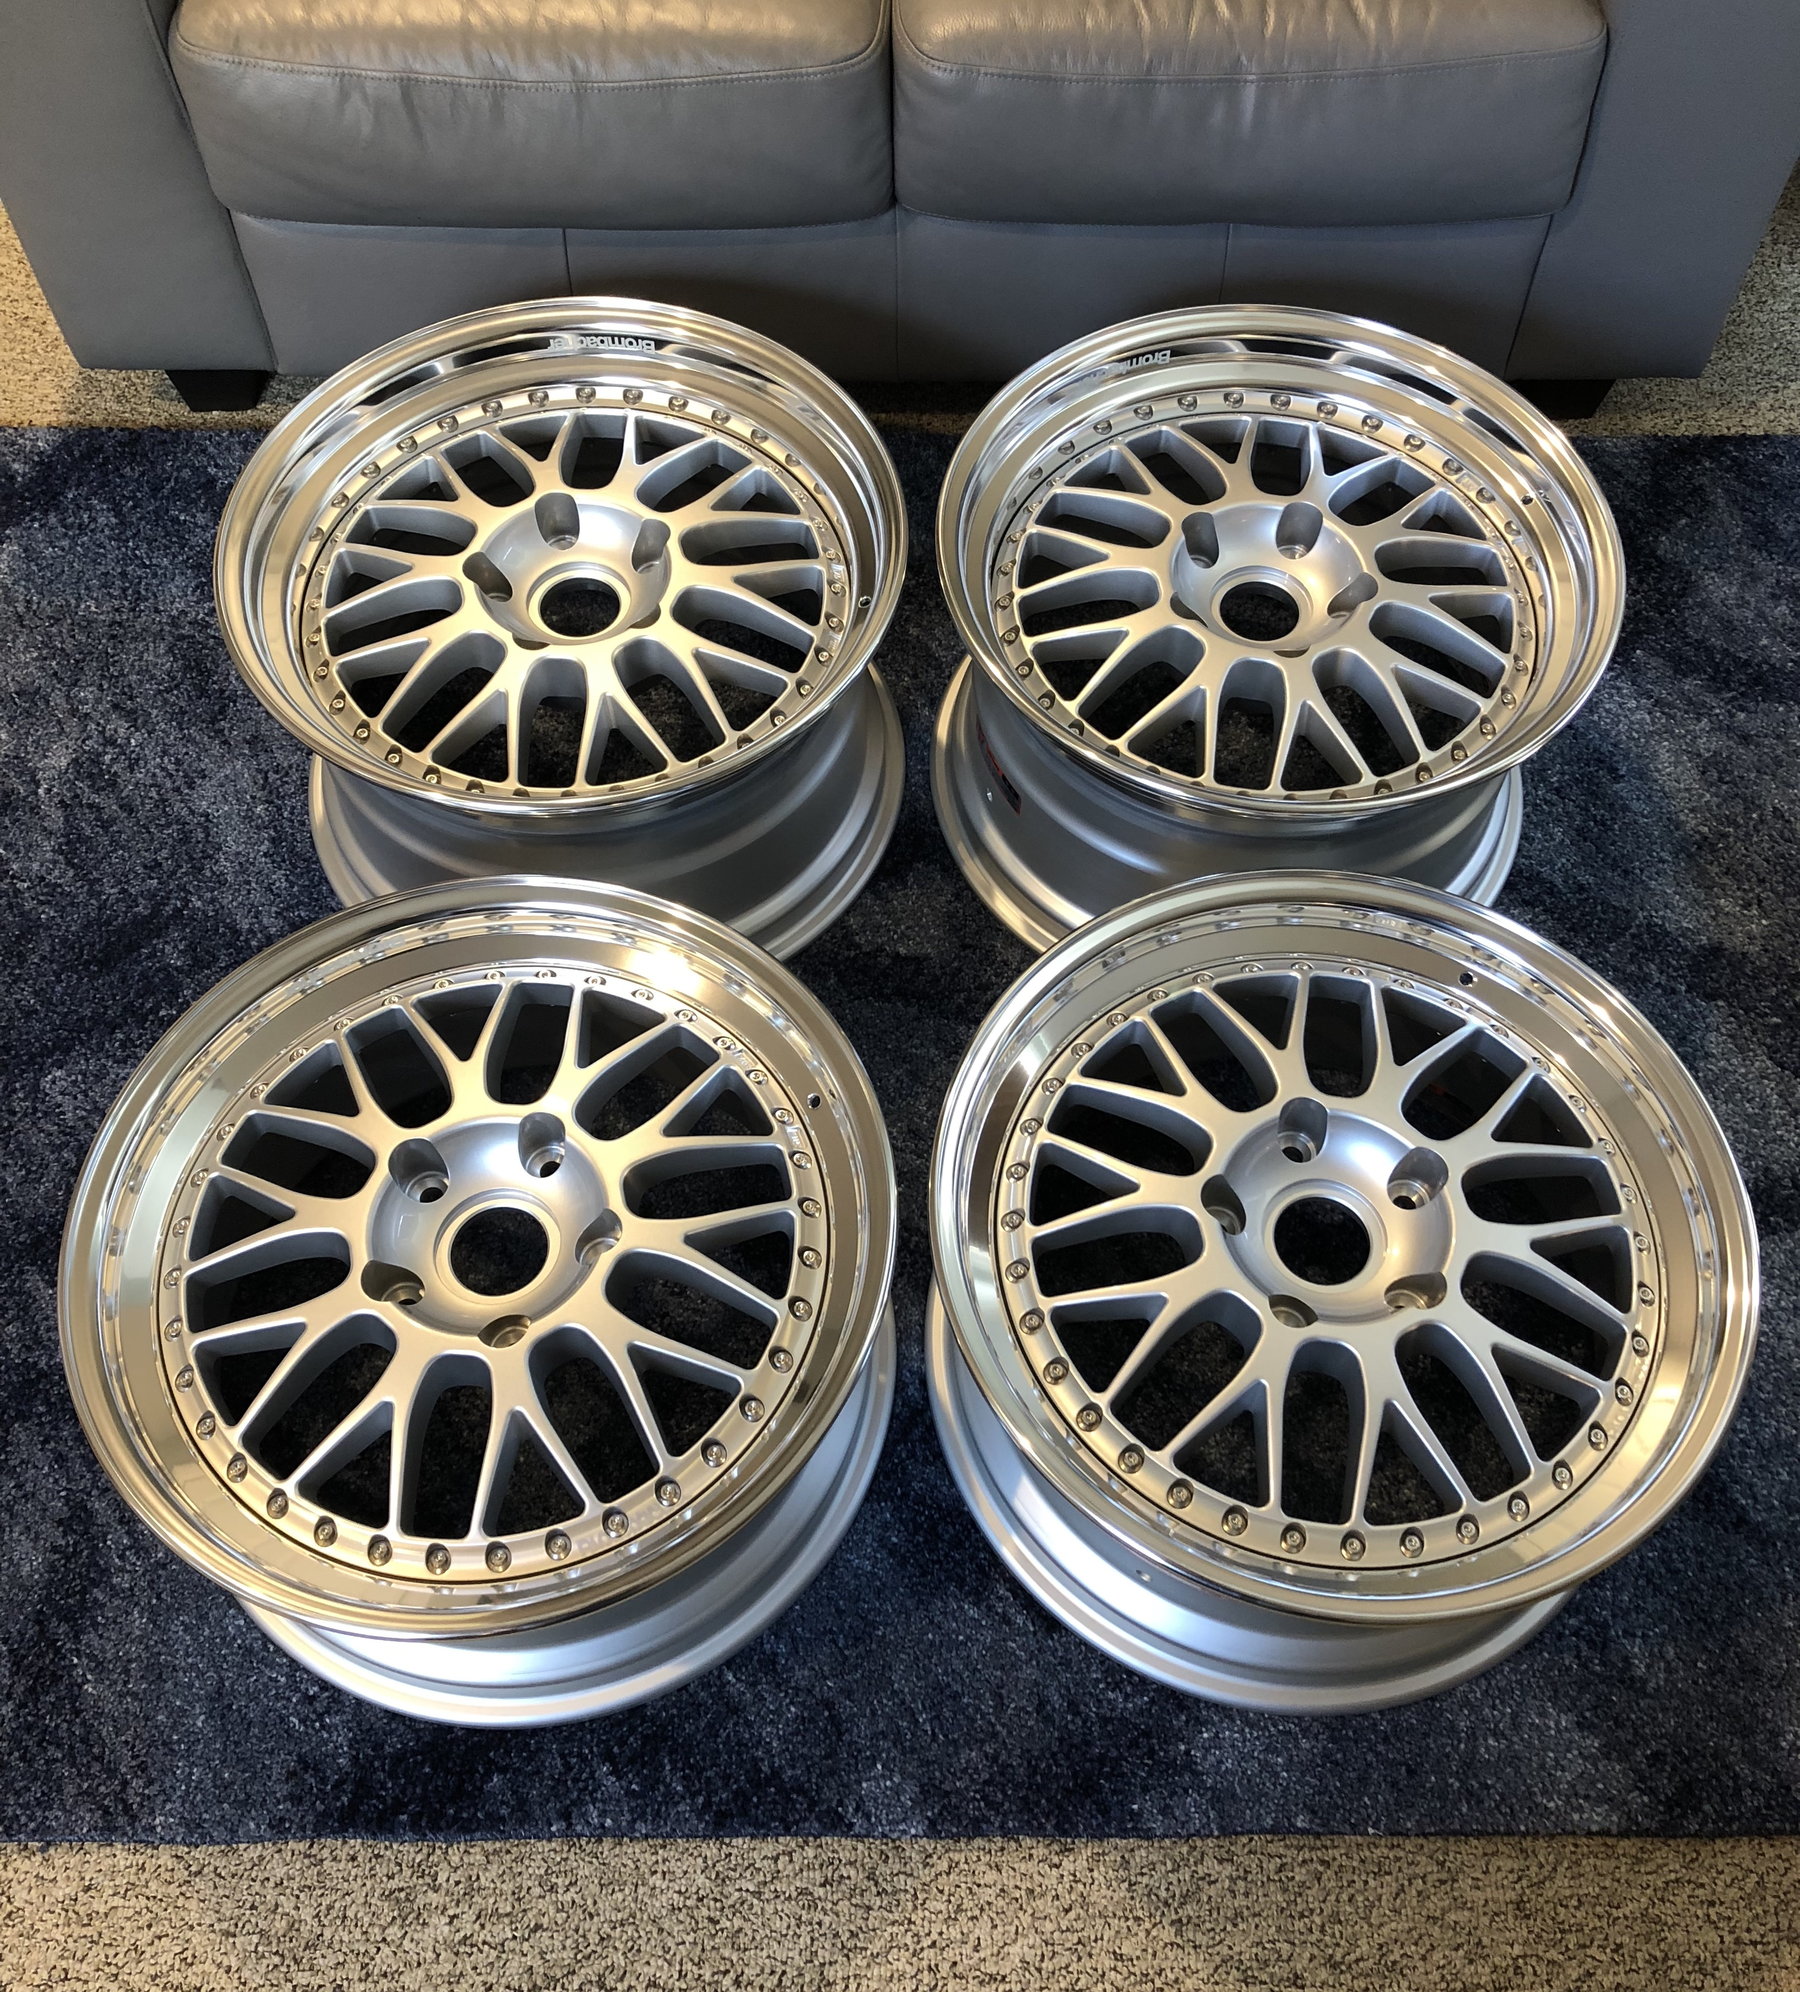 Wheels and Tires/Axles - FS: NEW 18x8.5 / 18x10 Work Brombacher Wheels - New - 2006 to 2018 Porsche Cayman - Garden City, NY 11501, United States